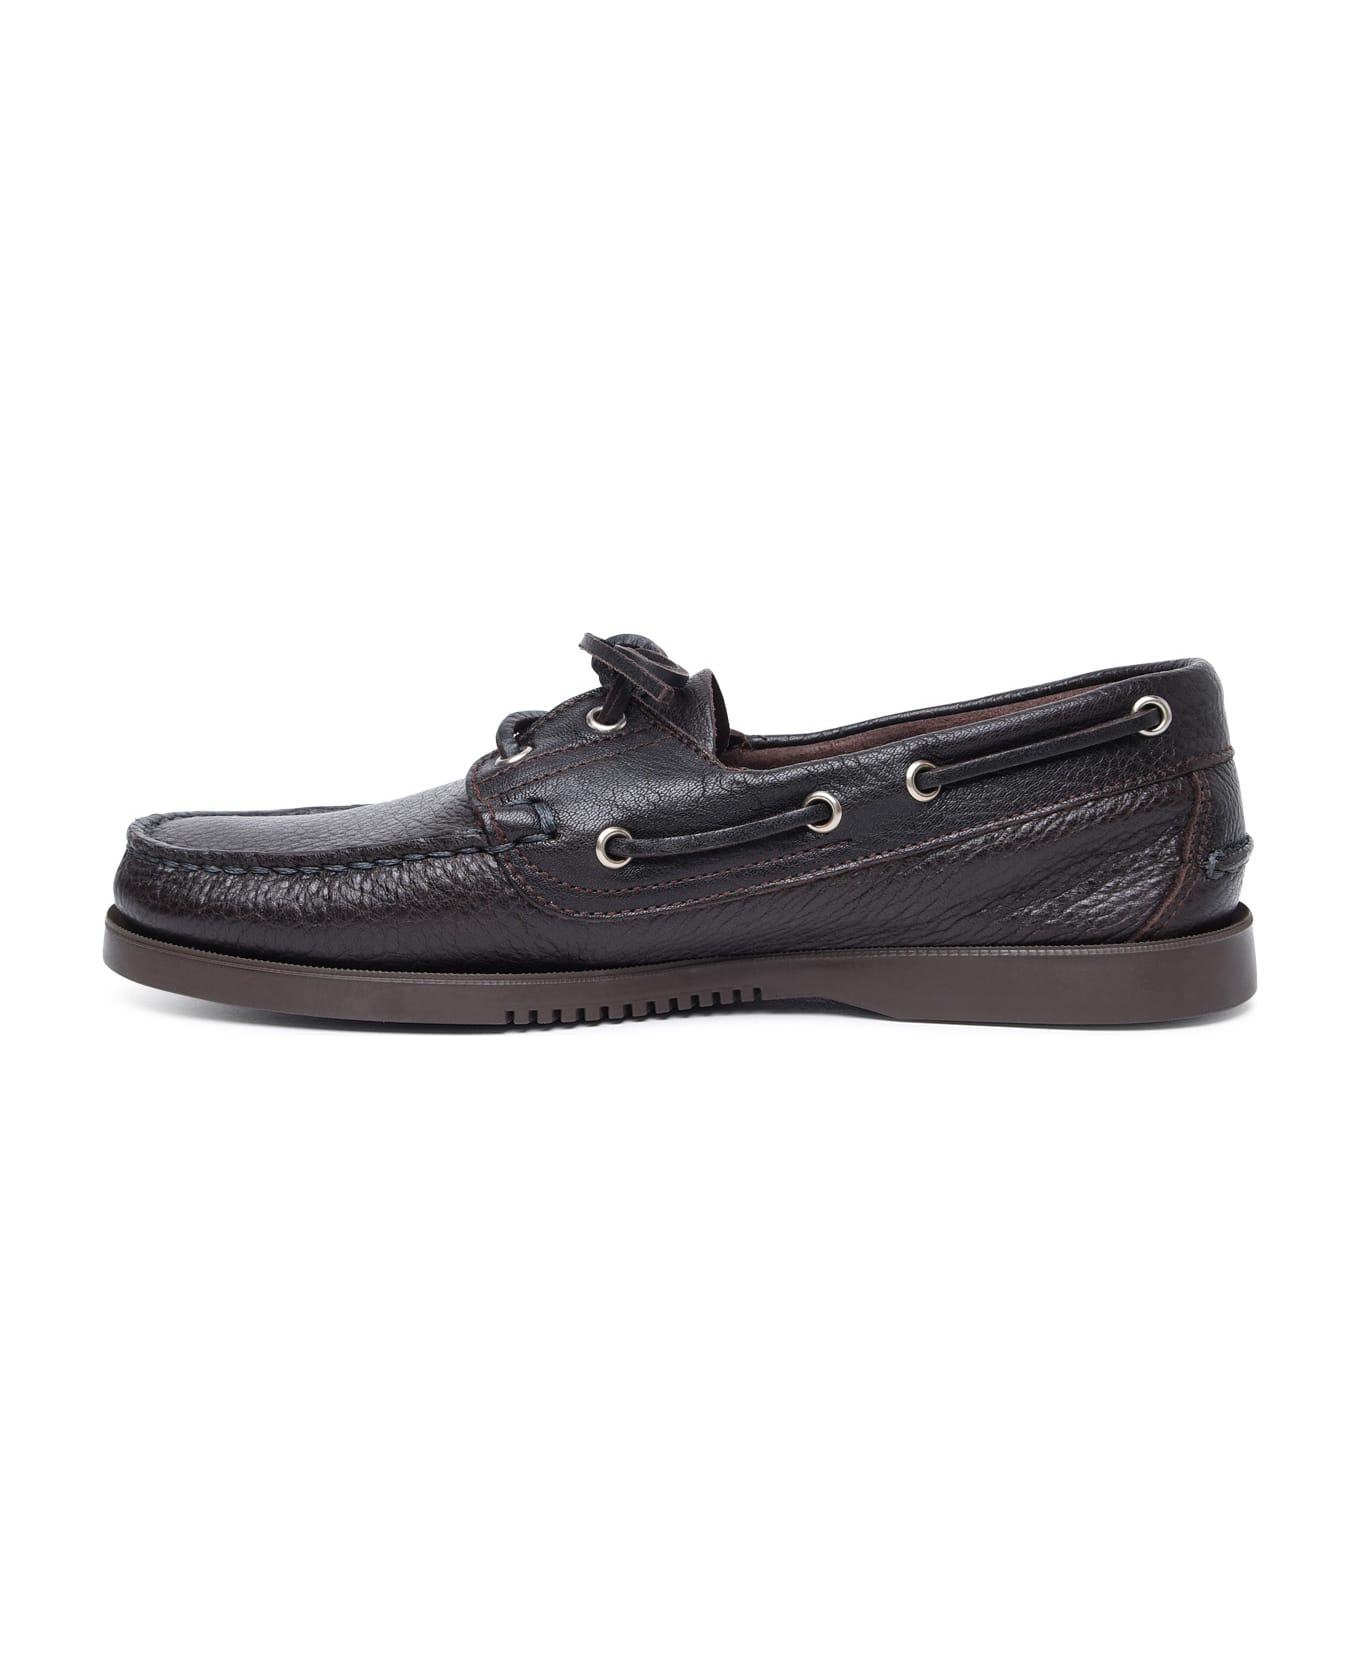 Paraboot 'barth' Brown Leather Loafers - Brown